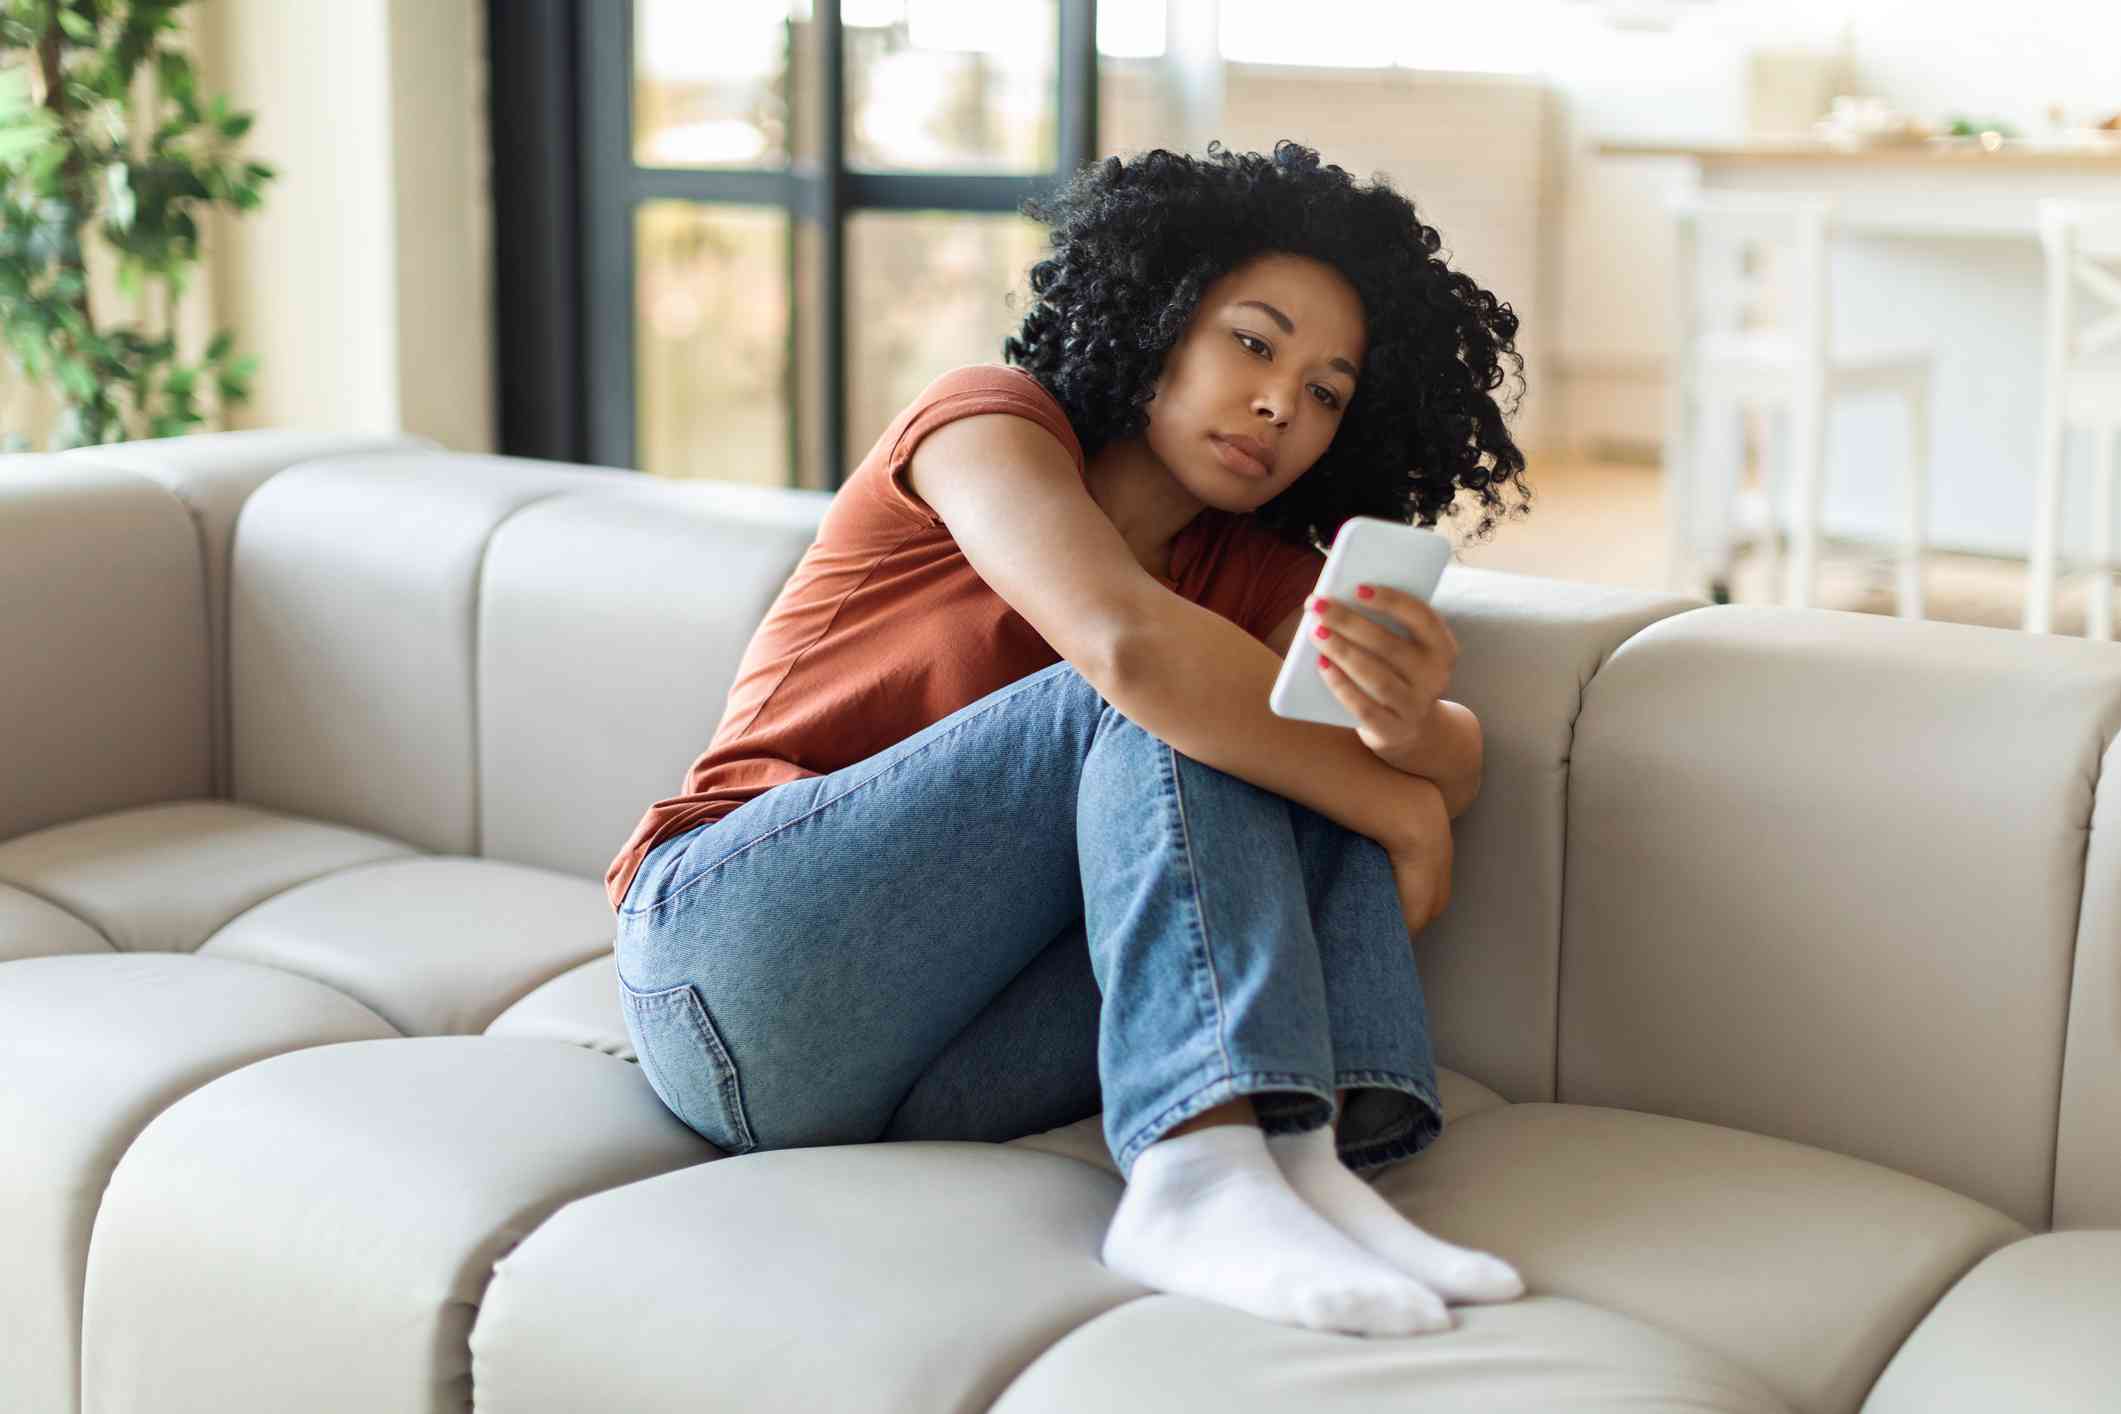 A woman in an orange shirt sits curled up on a grey couch and looks sadly down at the cellphone in her hand.